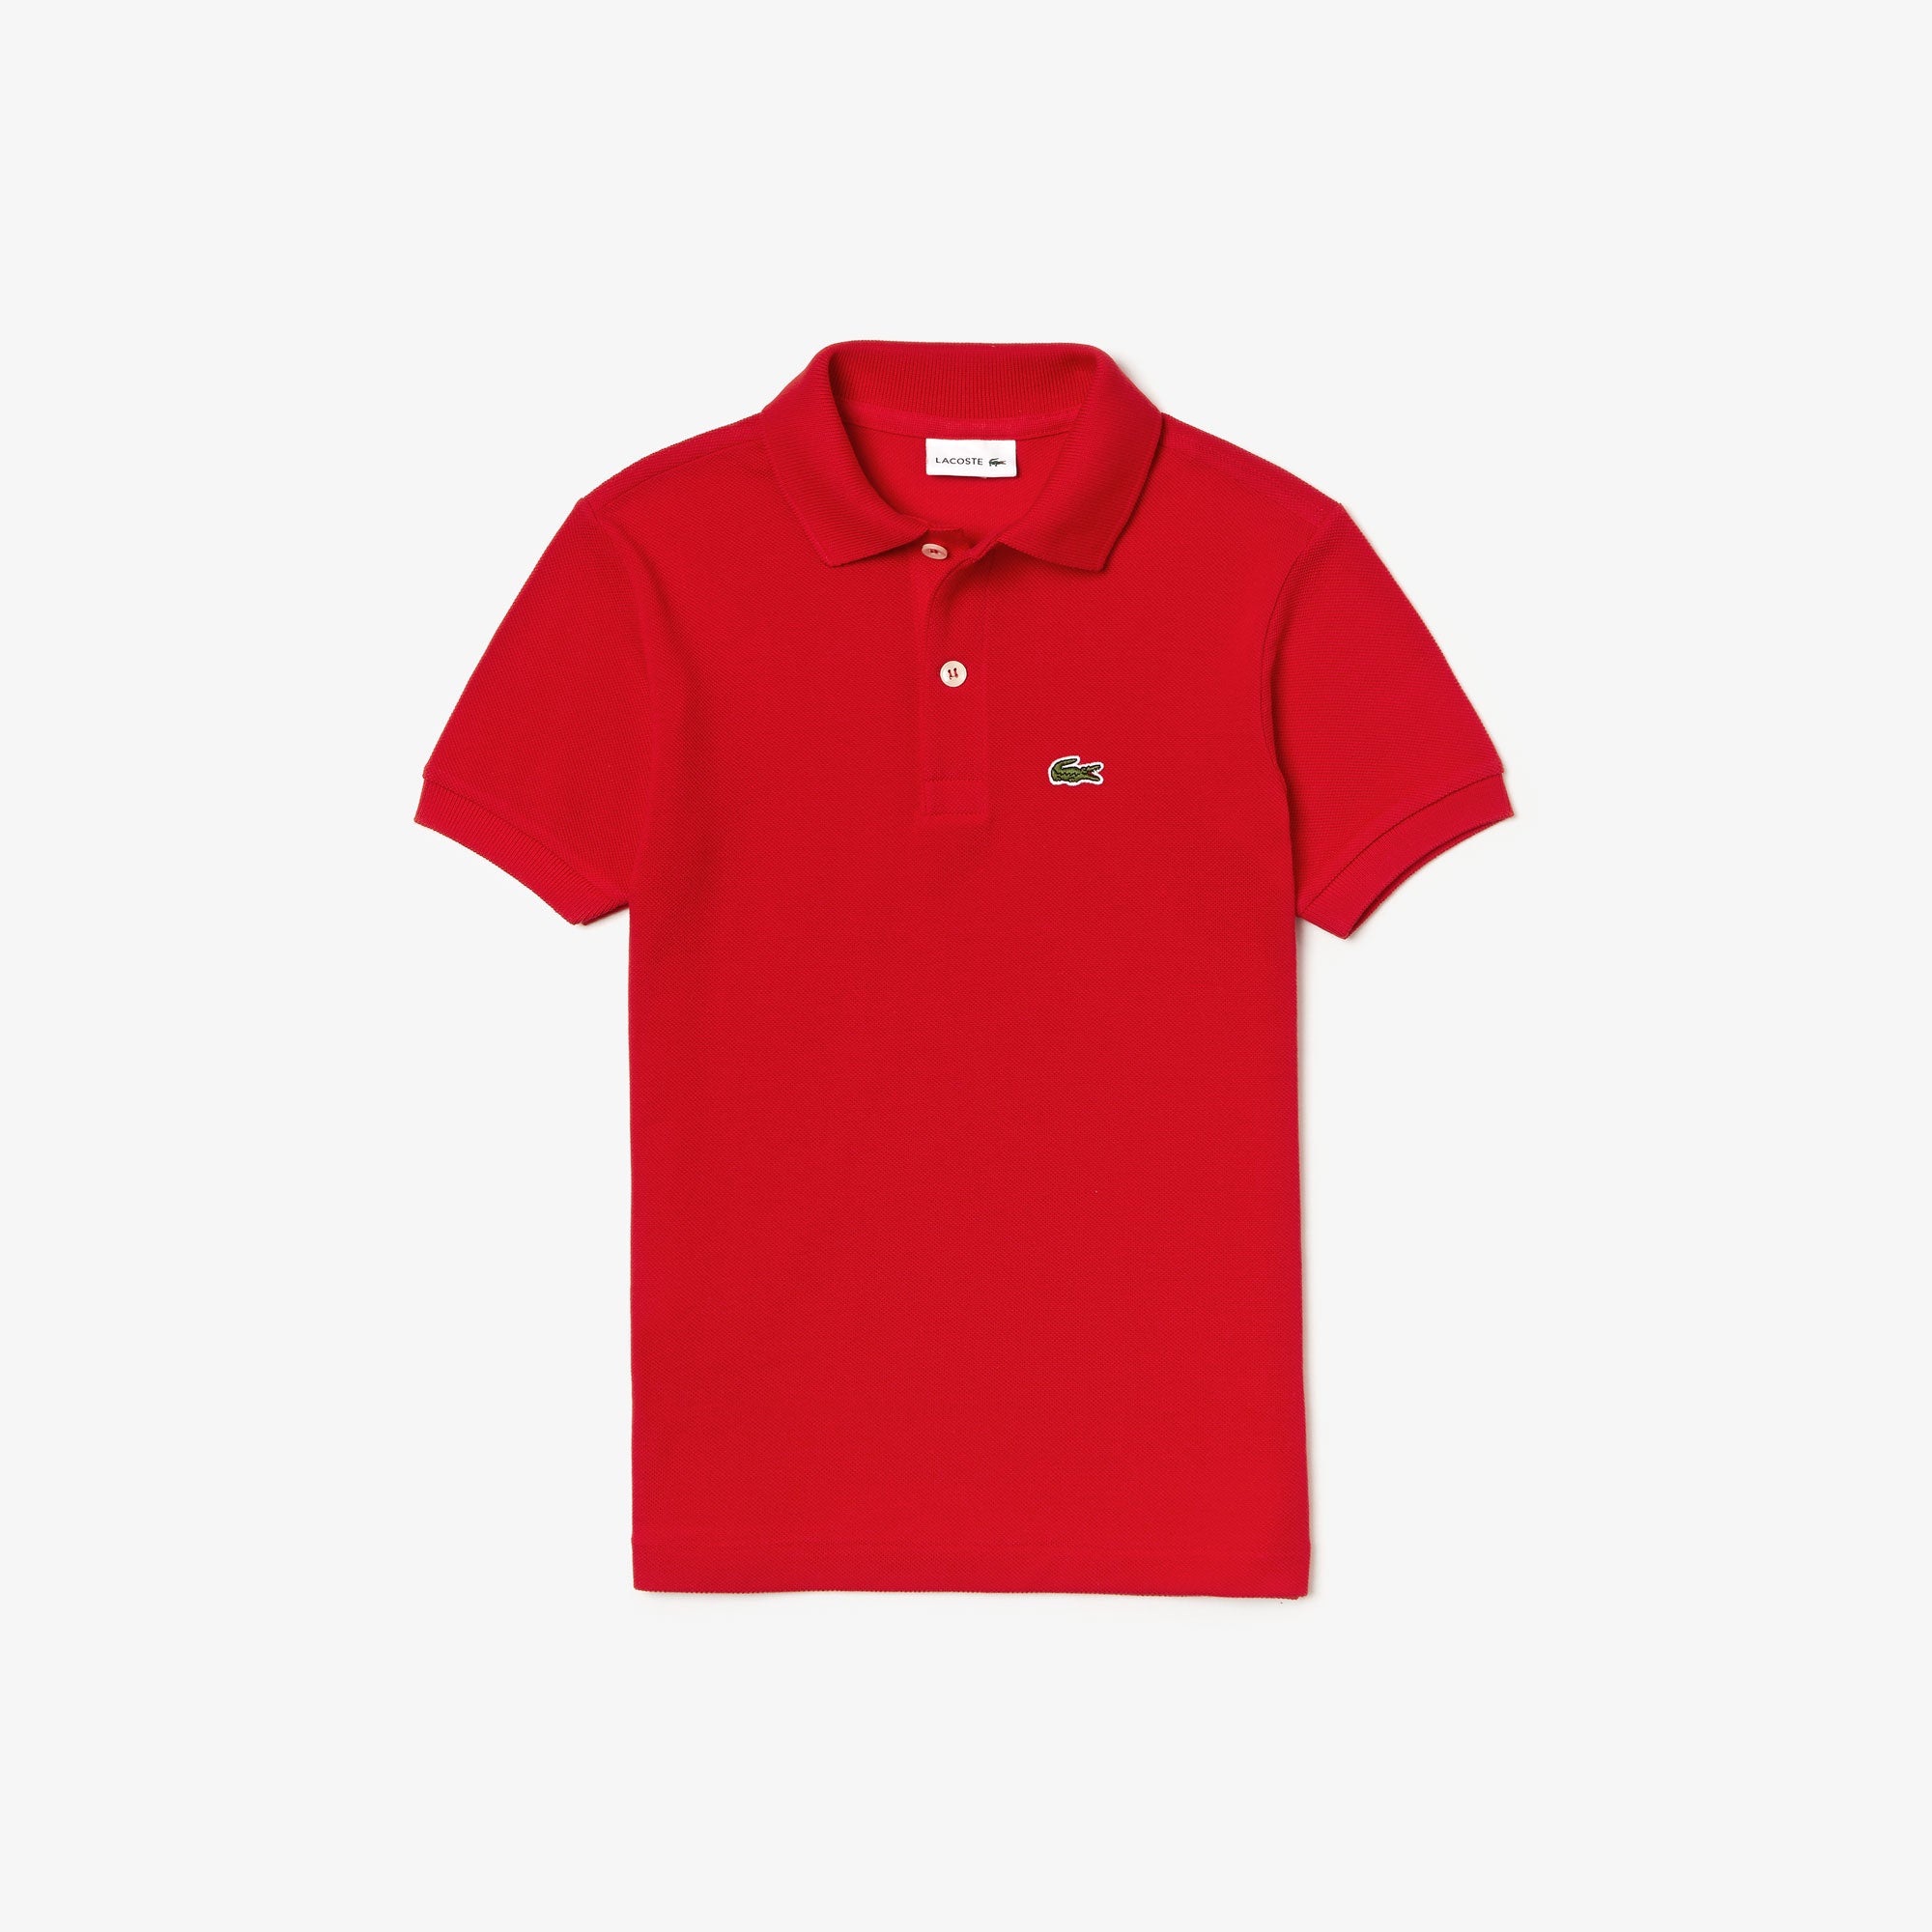 Shop The Latest Collection Of Lacoste Kids' Regular Fit Petit Pique Polo Shirt - Pj2909 In Lebanon